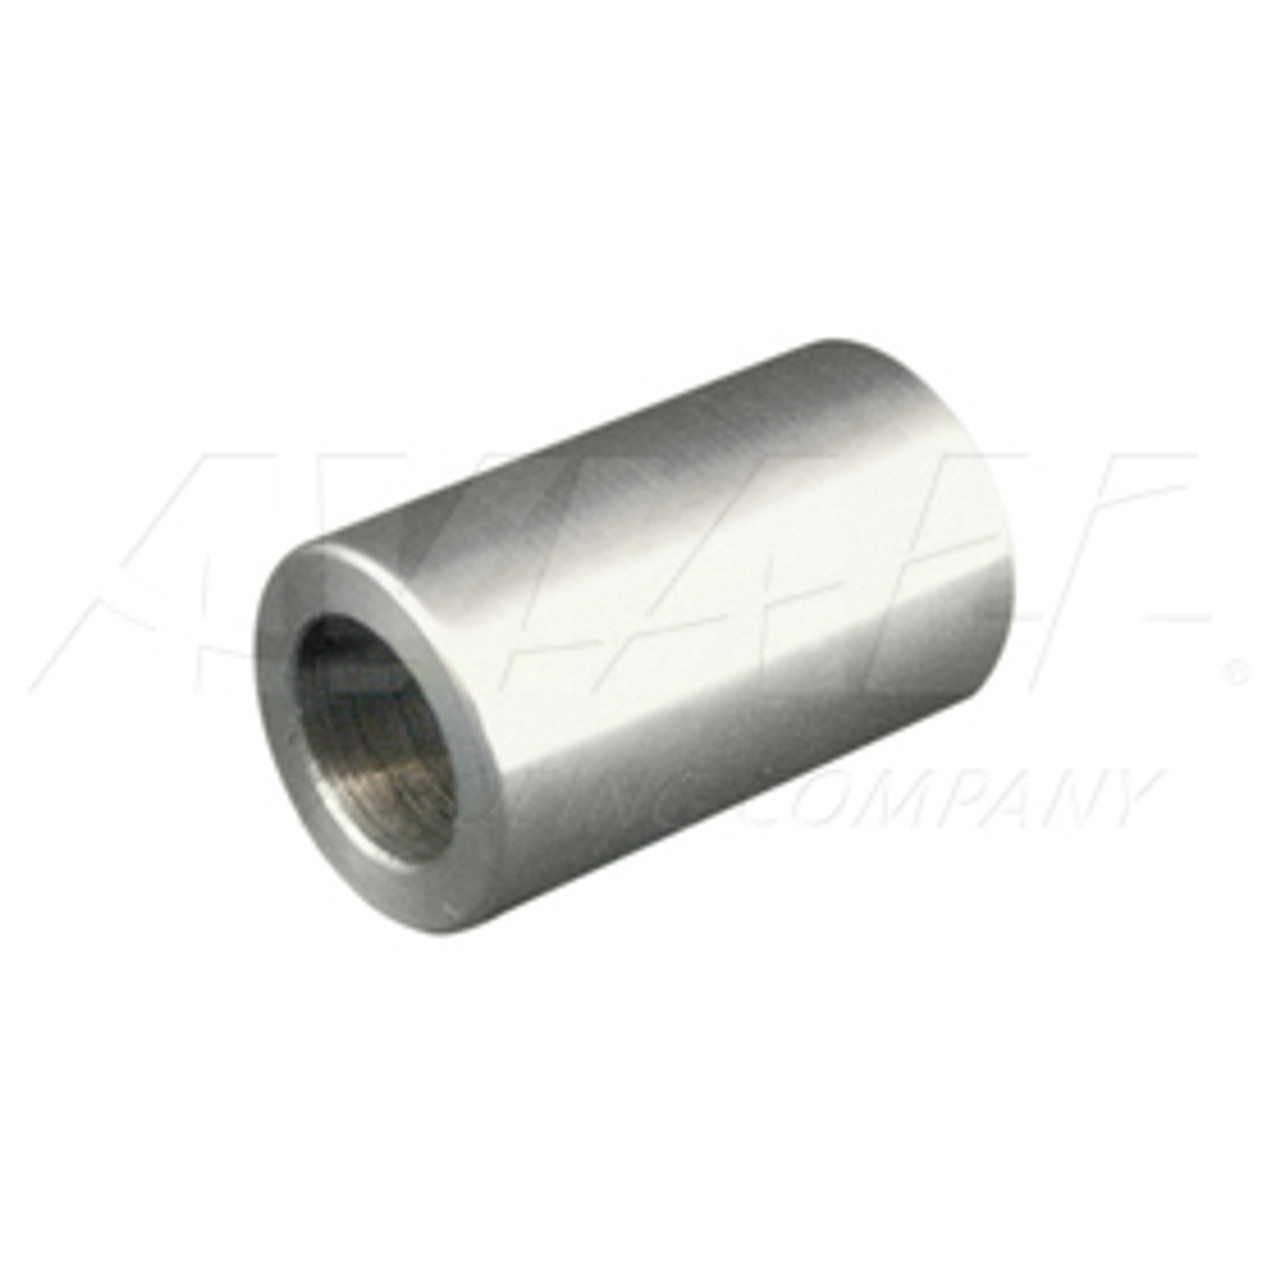 Piper 63310-000 Spacer